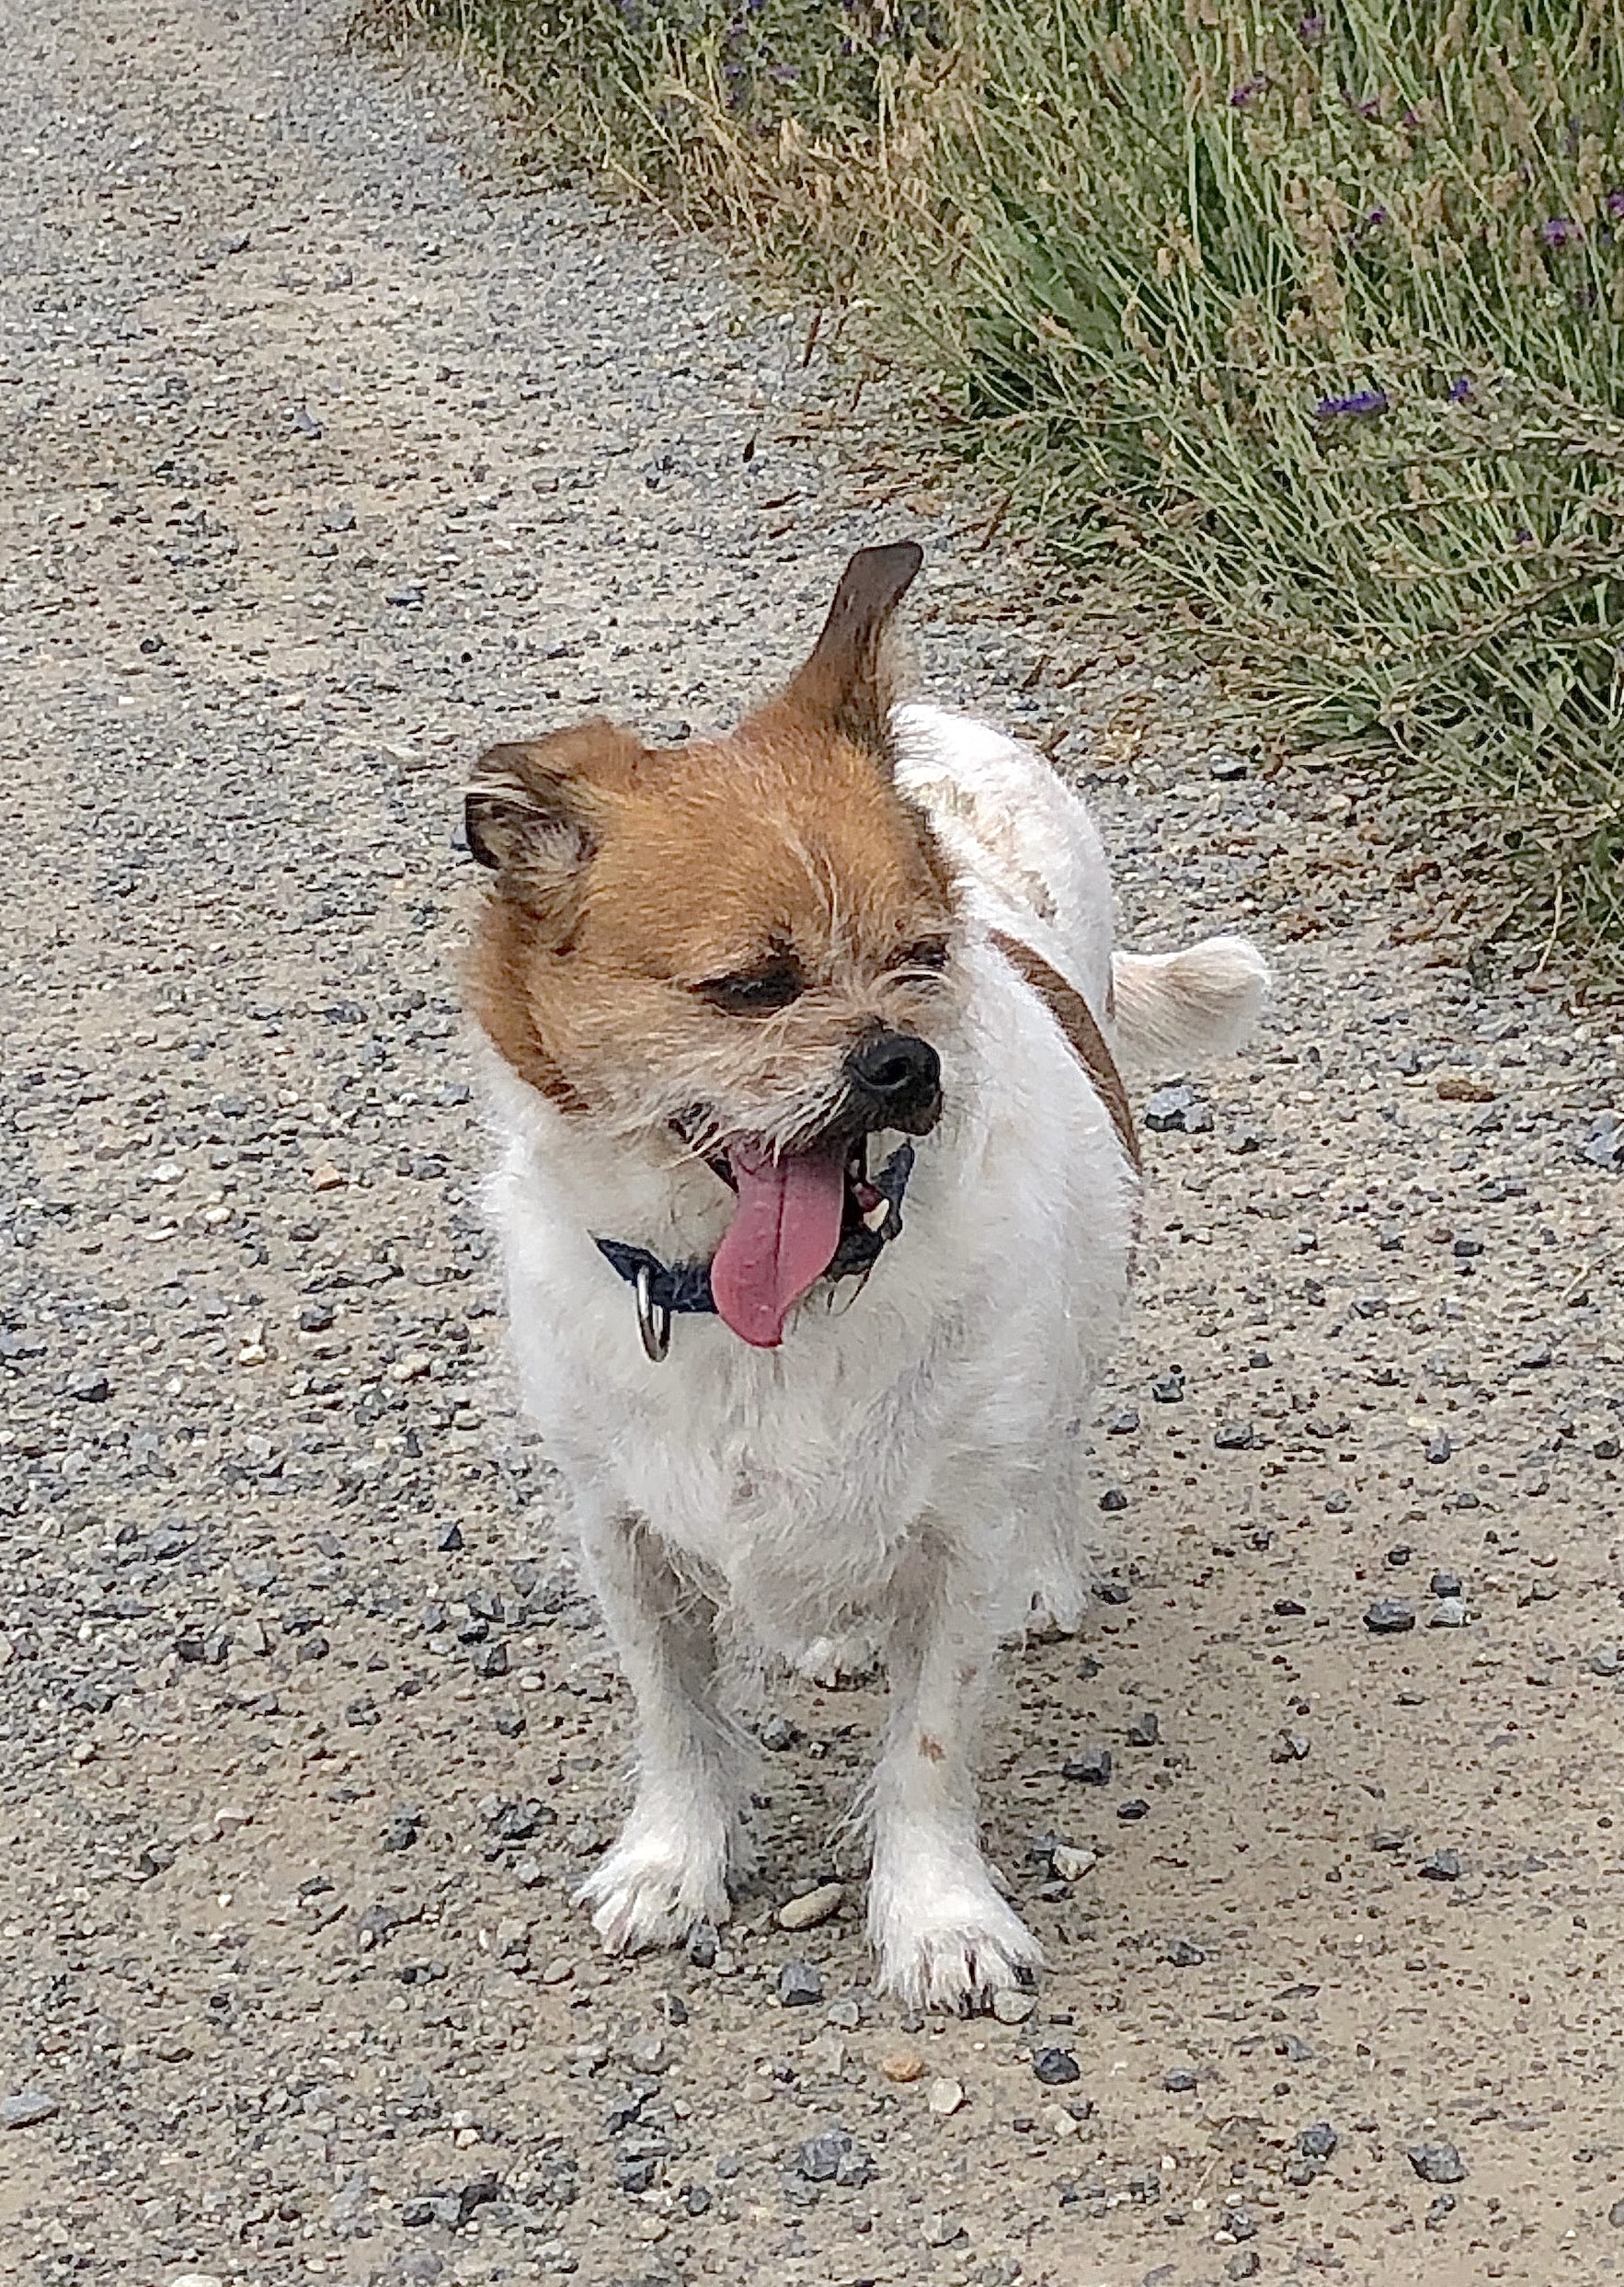 A small, scruffy, white and brown dog with eyes closed and tongue hanging out